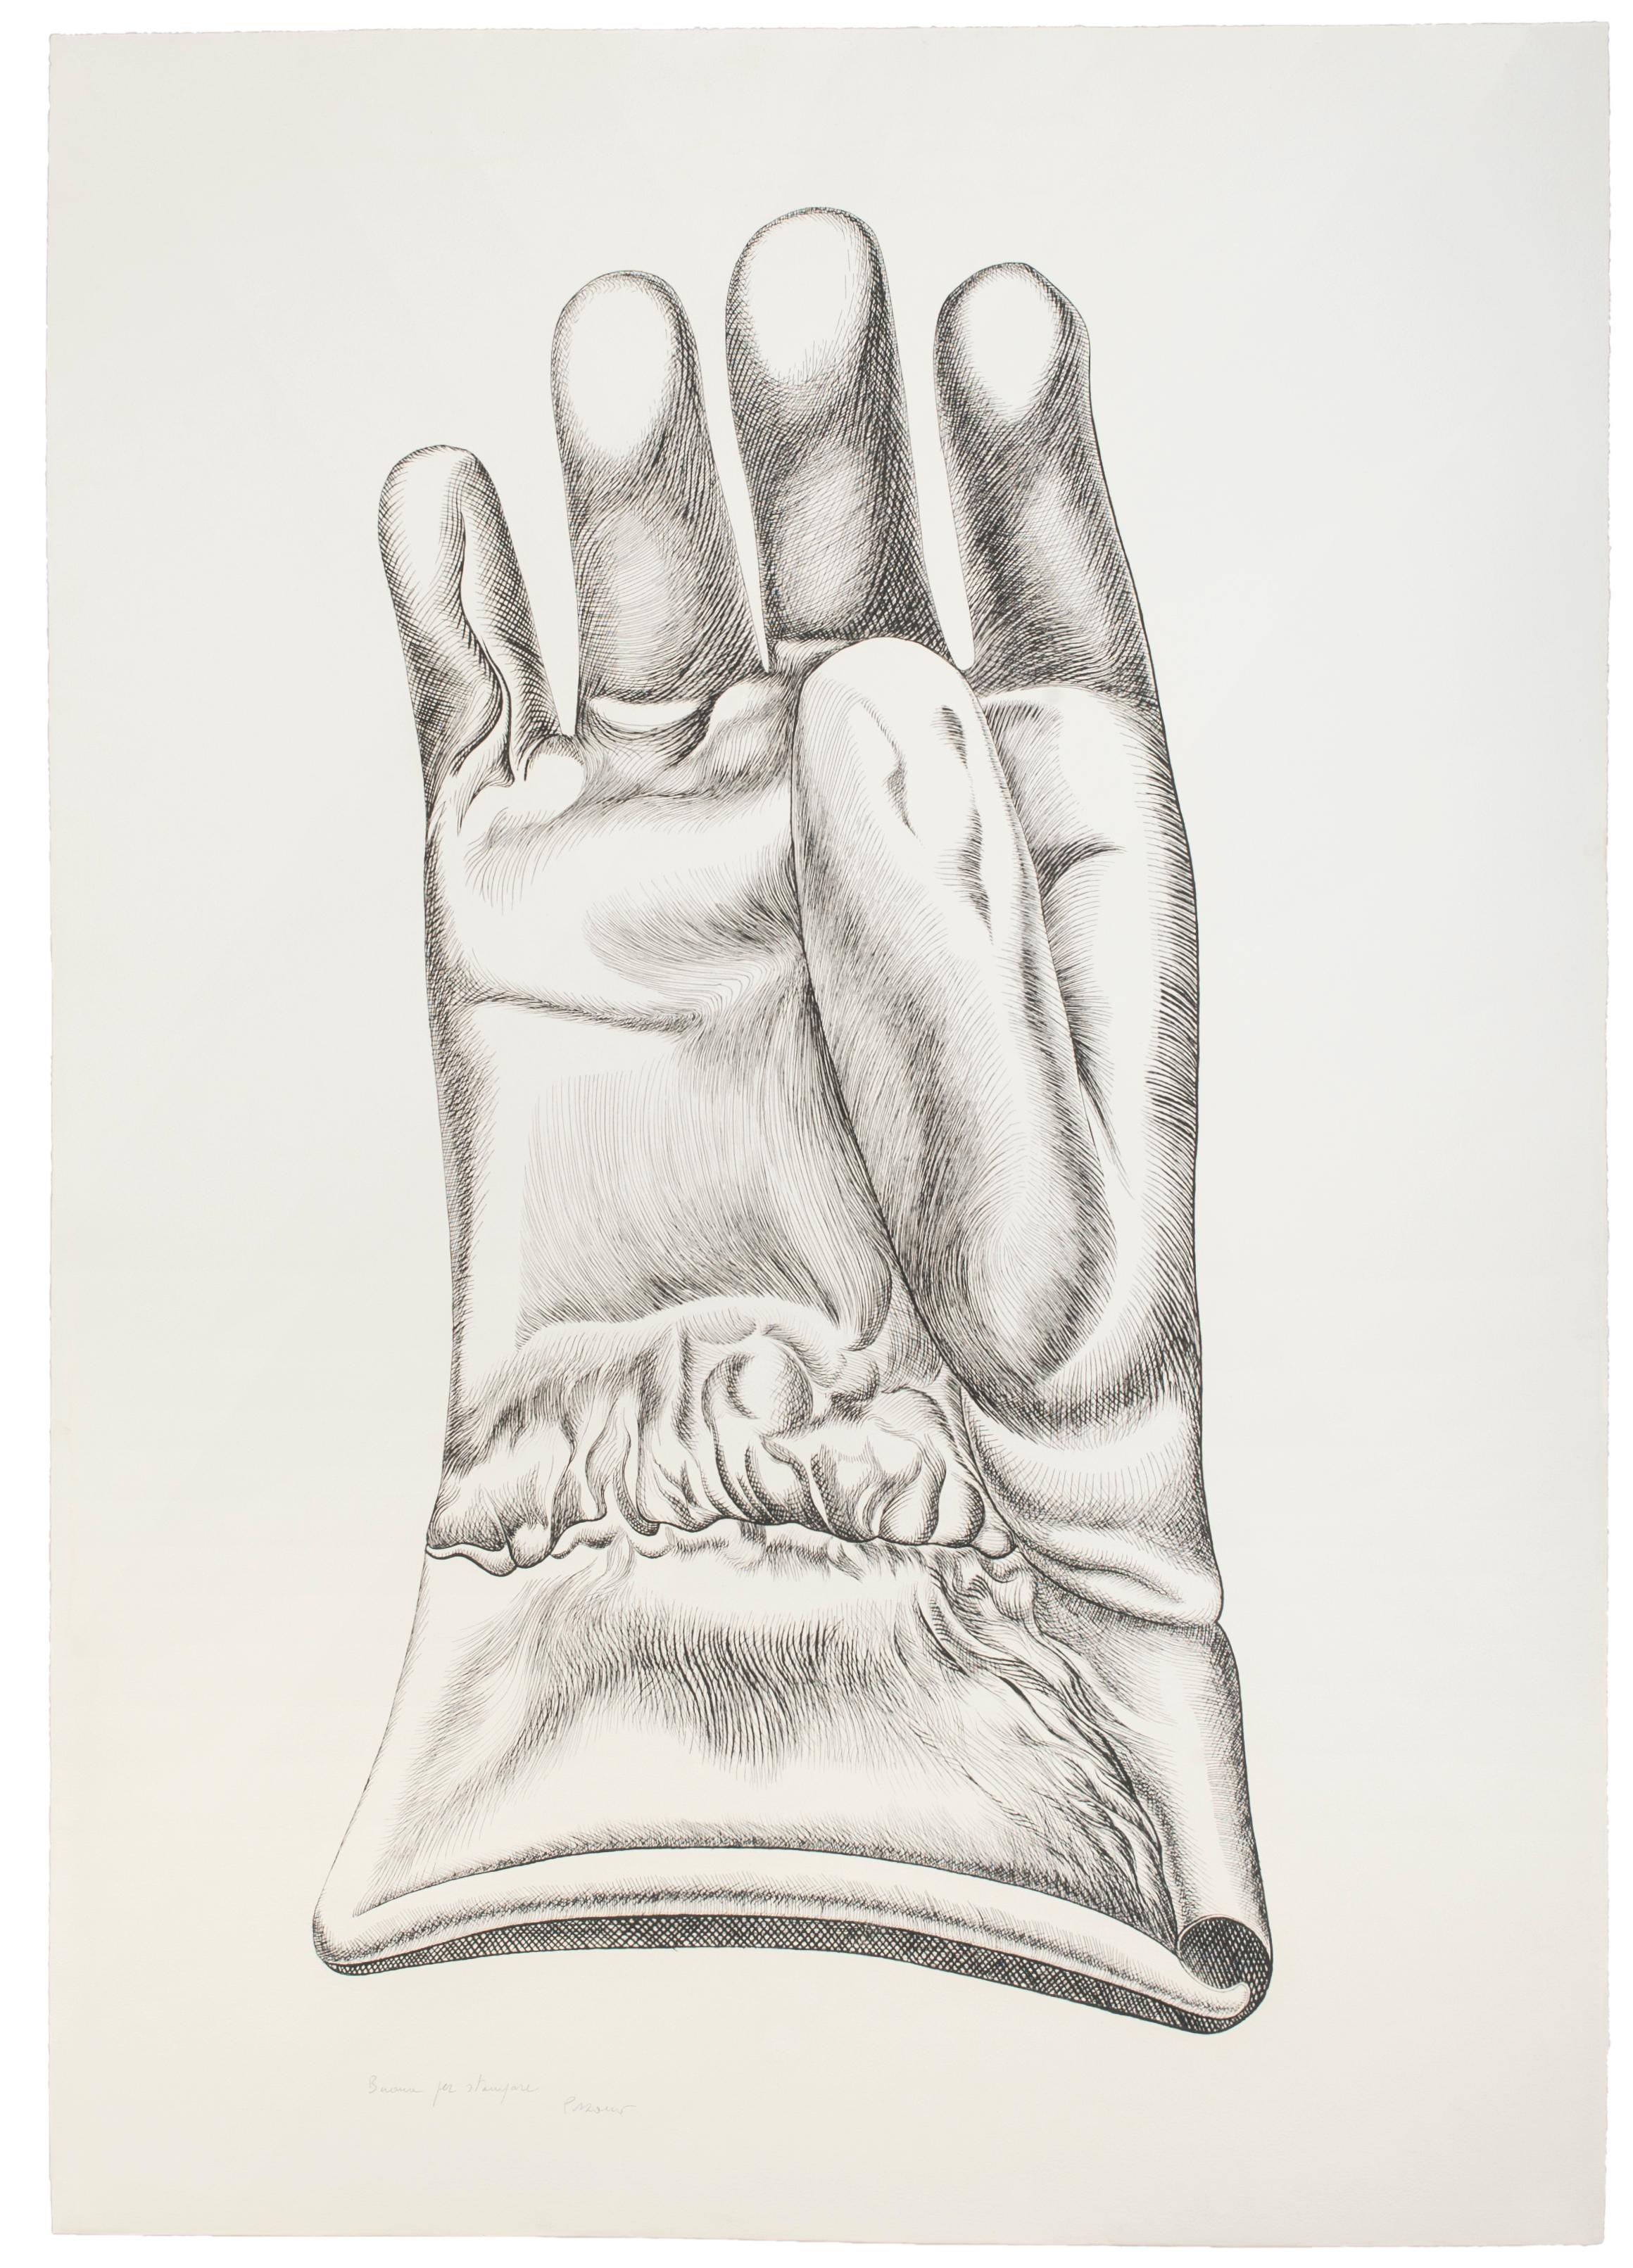 Black and White Glove - Guanto Bianco e Nero is a beautiful etching on paper, realized in 1972 by the Italian artist Giacomo Porzano (1925-2006).

This is a superb artist's proof, as the pencil inscriptions report on the lower margin: "Buona per la